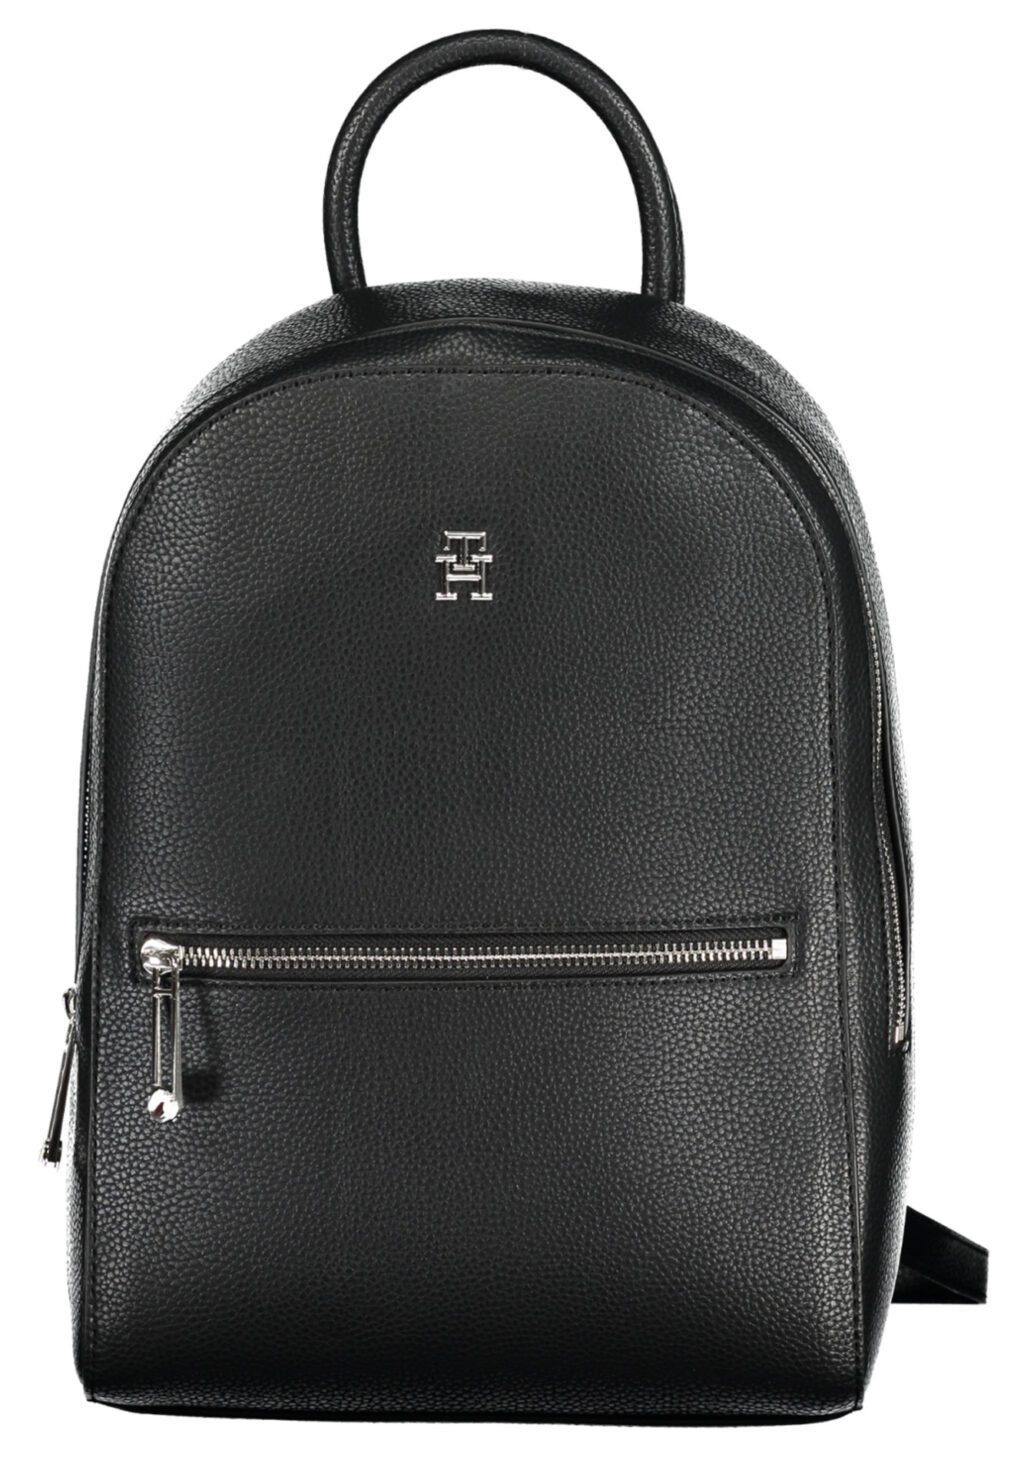 TOMMY HILFIGER WOMEN'S BLACK BACKPACK AW0AW15213_NEBDS